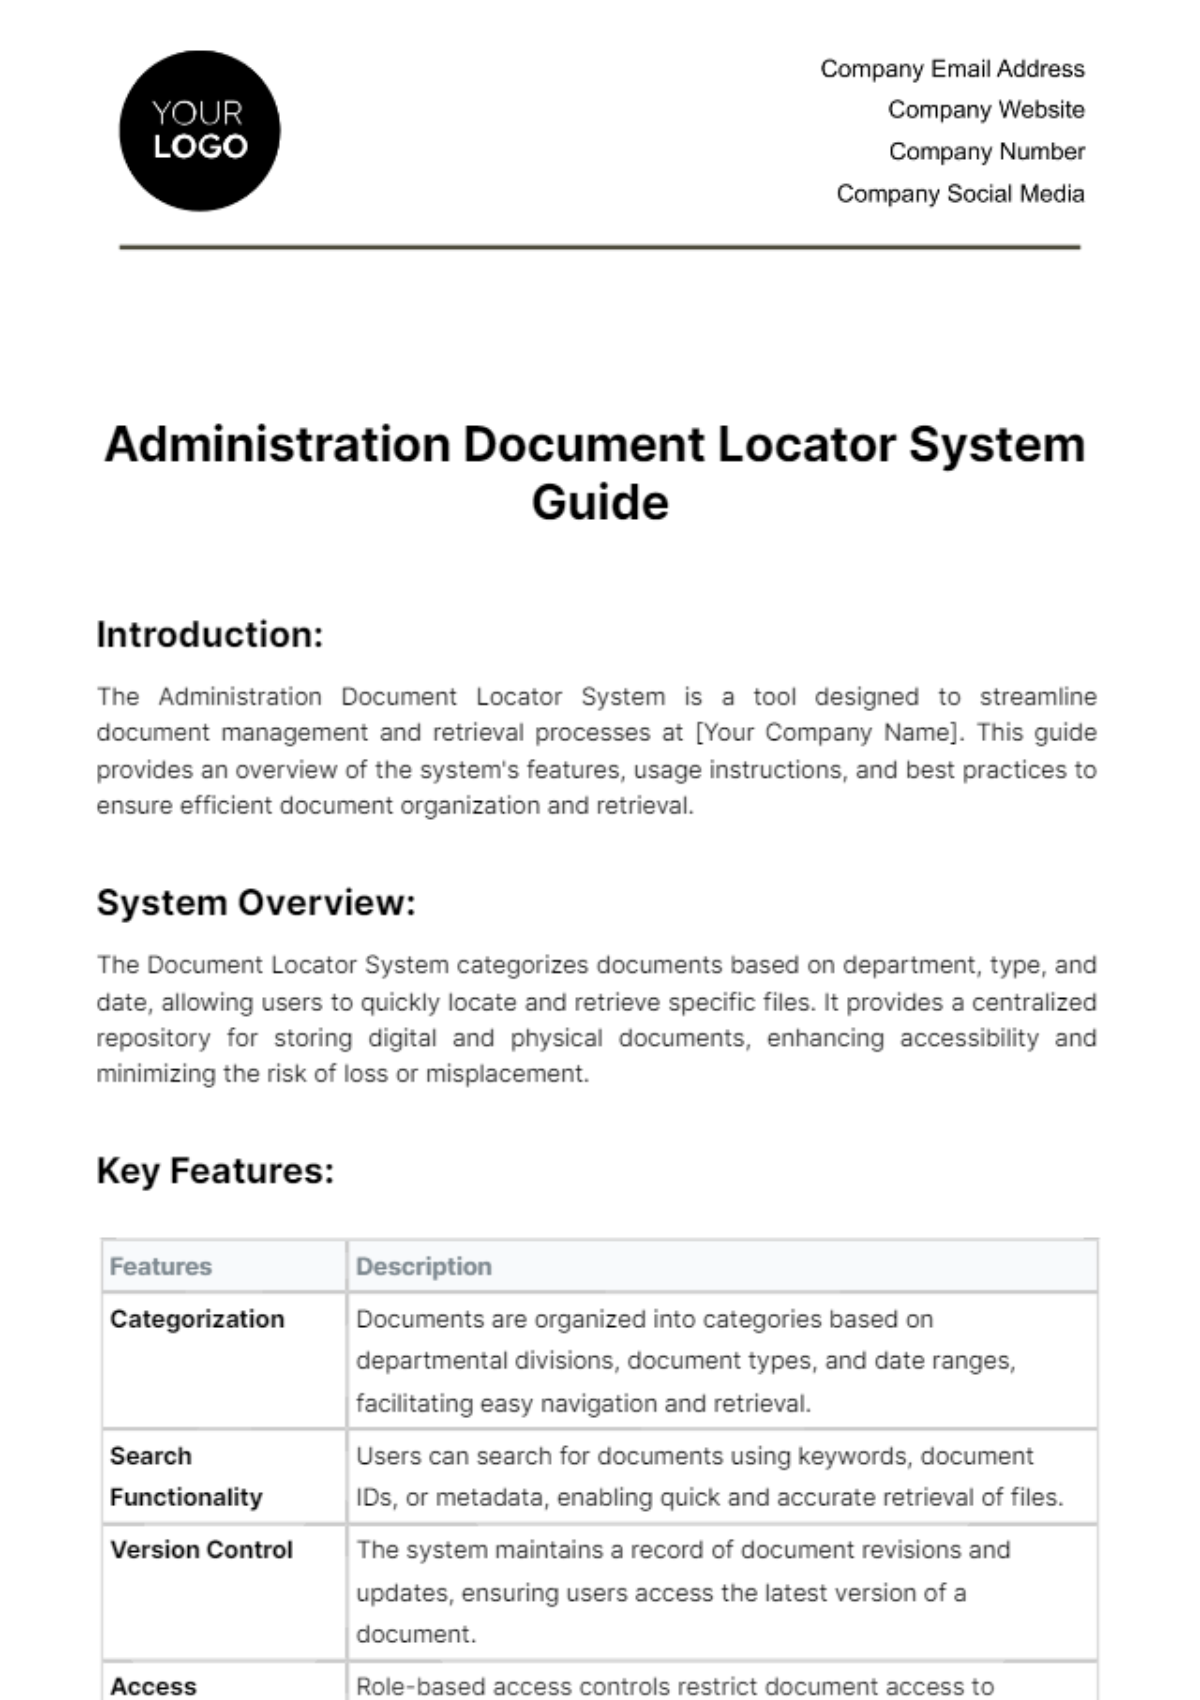 Administration Document Locator System Guide Template